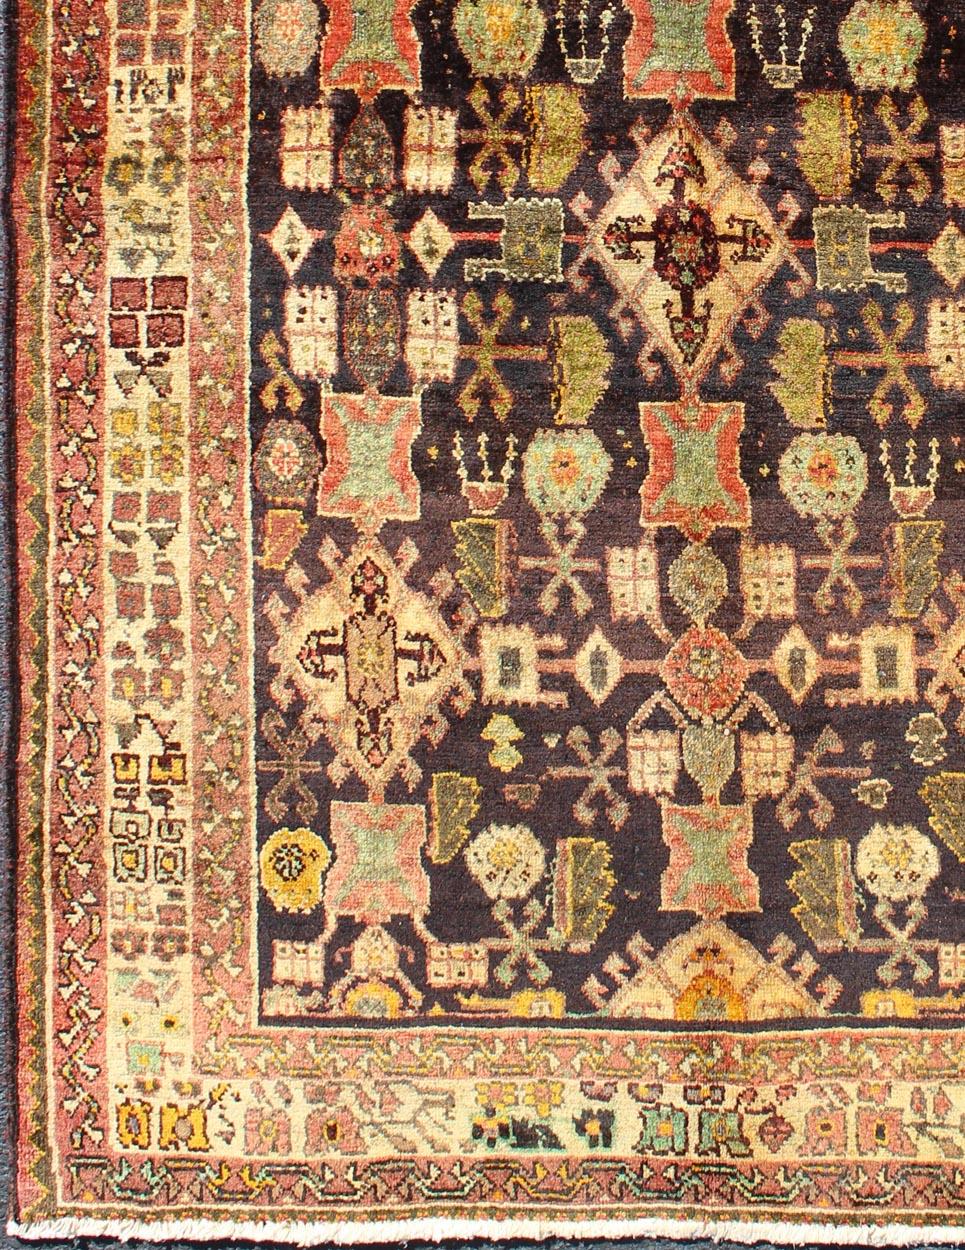 Vintage Persian Gabbeh carpet with all-over geometric Design and Midnight Field, rug h-905-07, country of origin / type: Iran / Tribal, circa 1940

This dazzling Vintage Persian Gabbeh rug bears a remarkable all-over geometric design paired with a